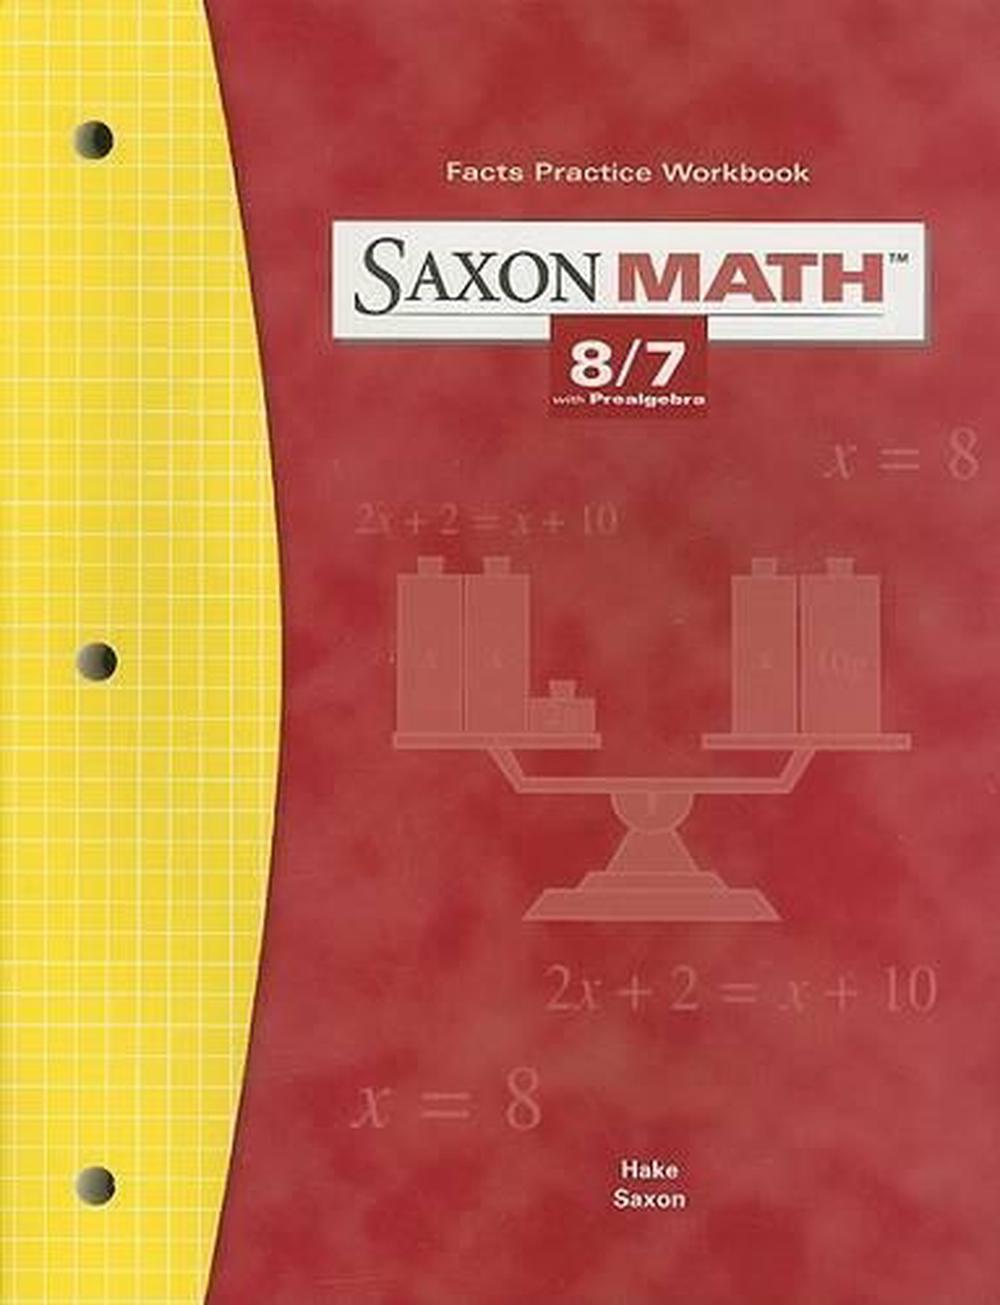 Saxon Math 8 7 Facts Practice Workbook With Prealgebra By Stephen Hake English 9781591412854